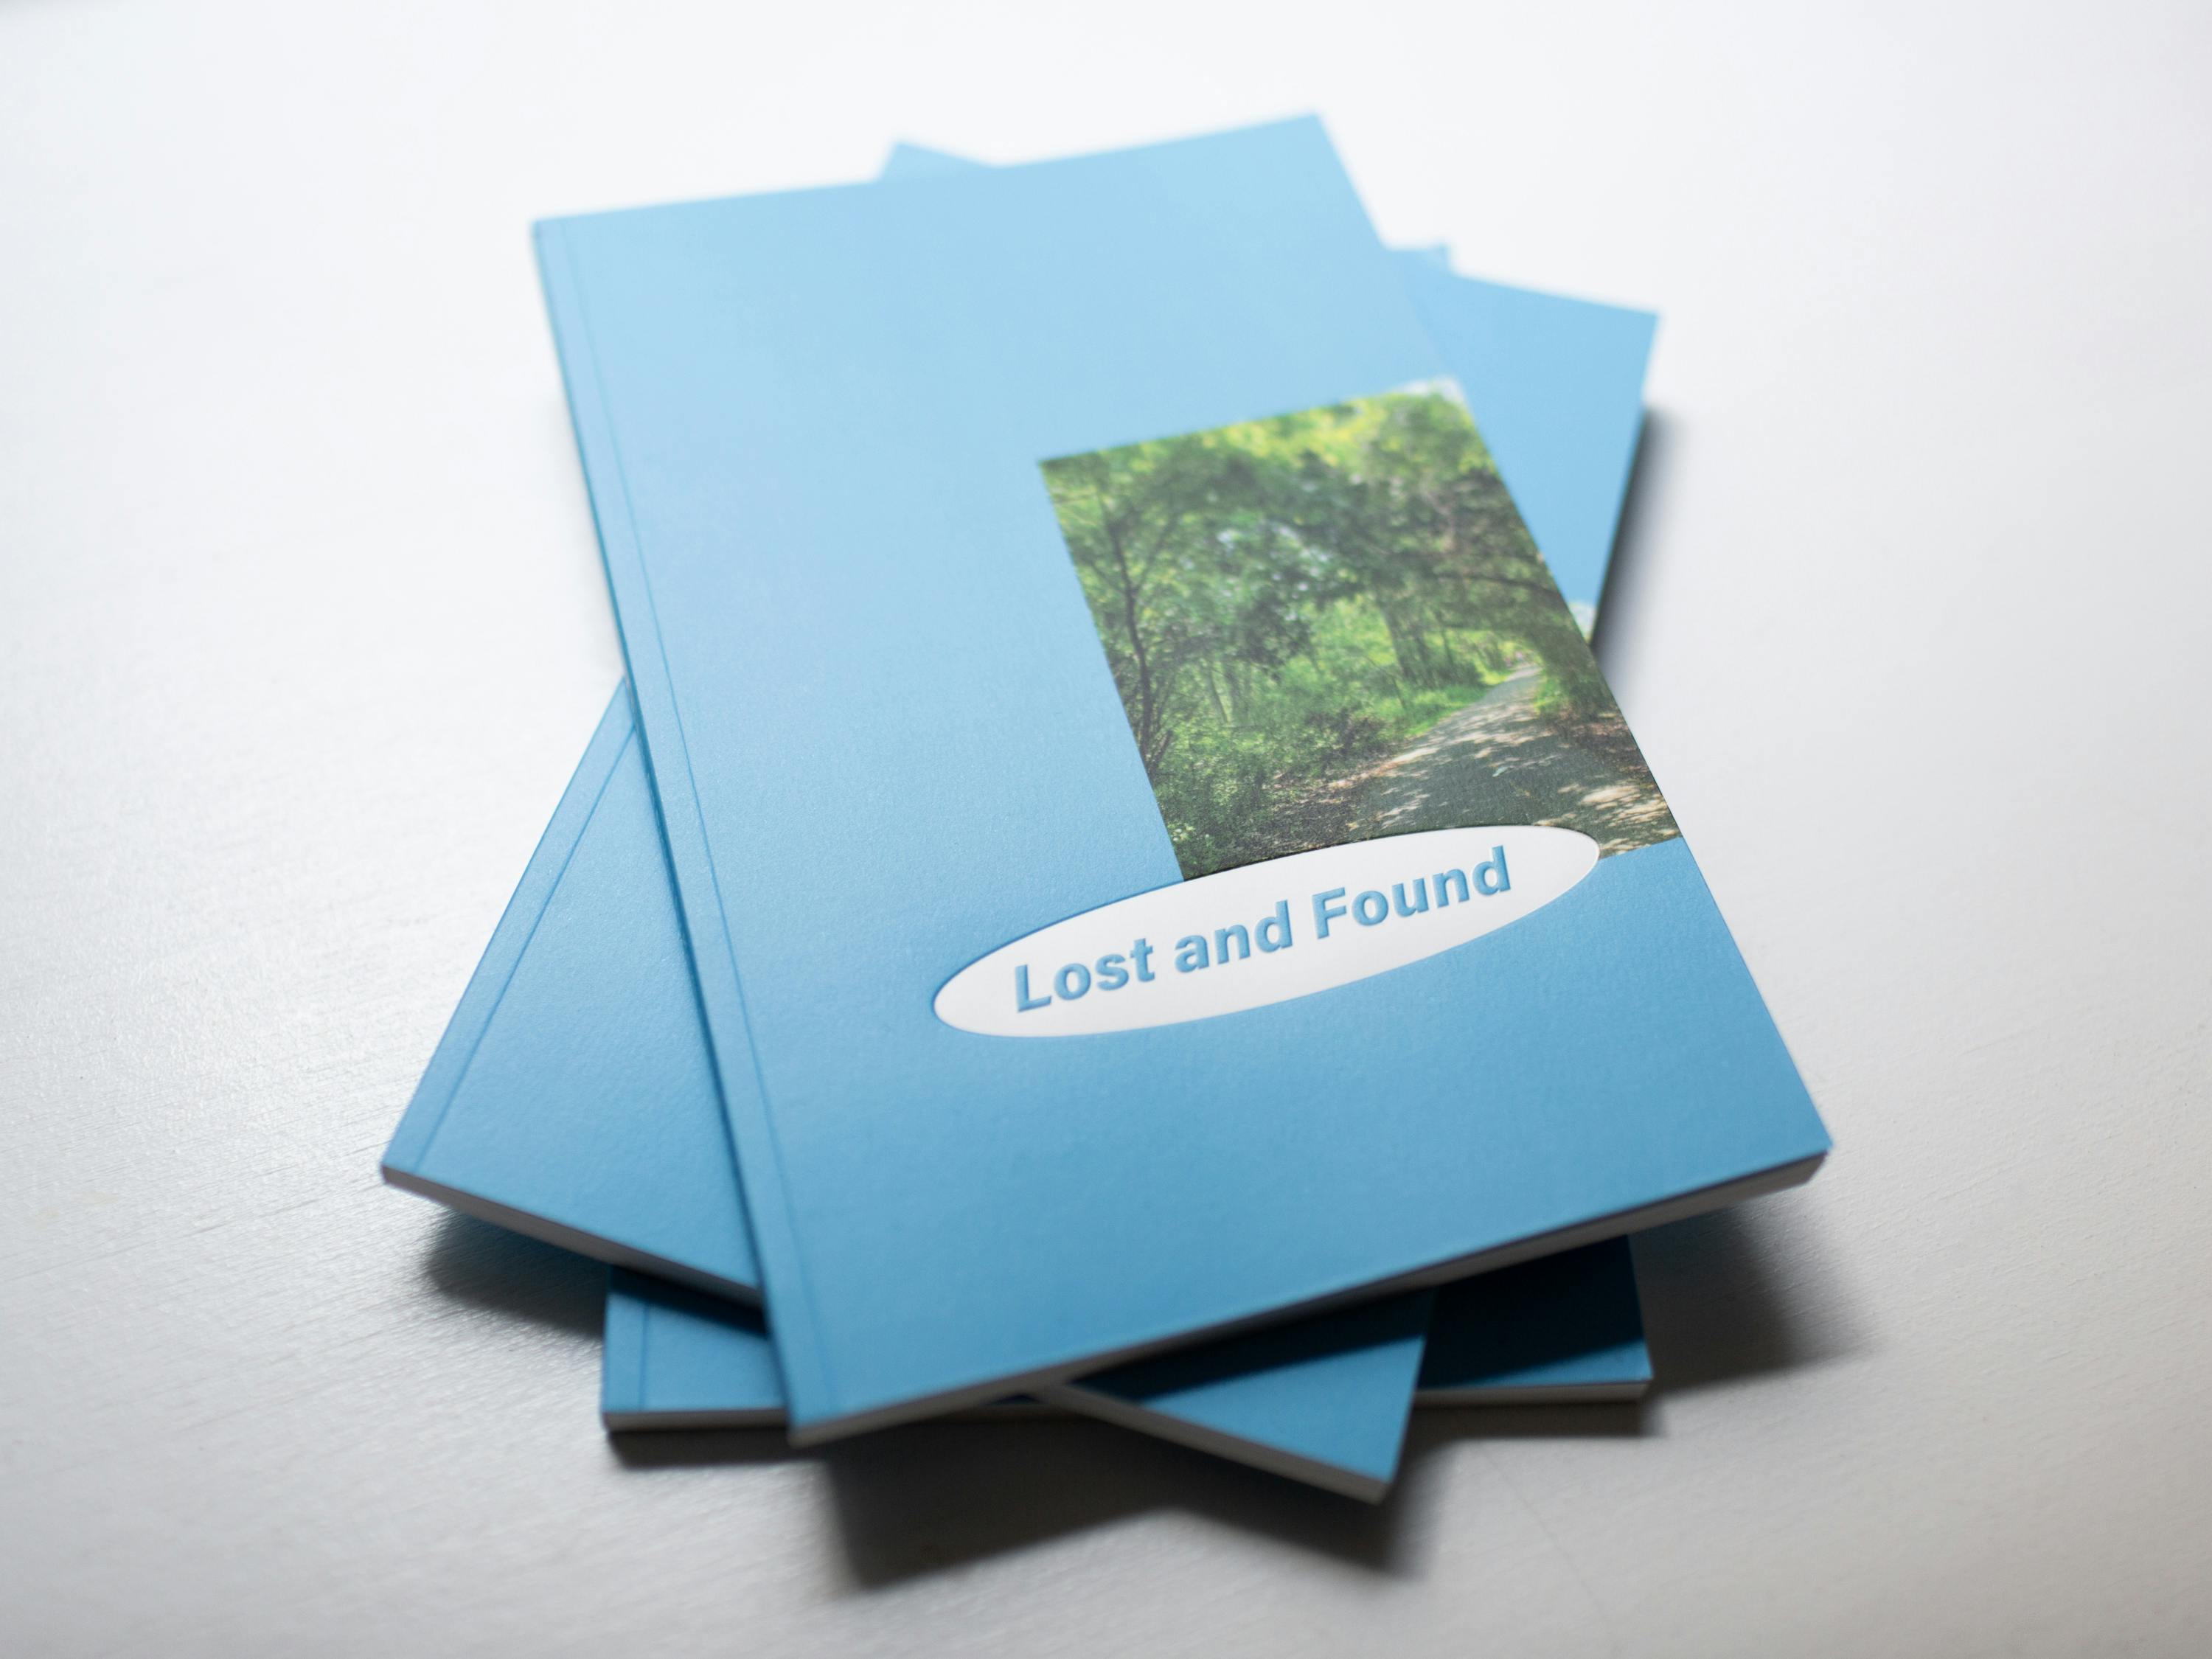 Lost and Found Project Publication. Photo by Mark Bennett.